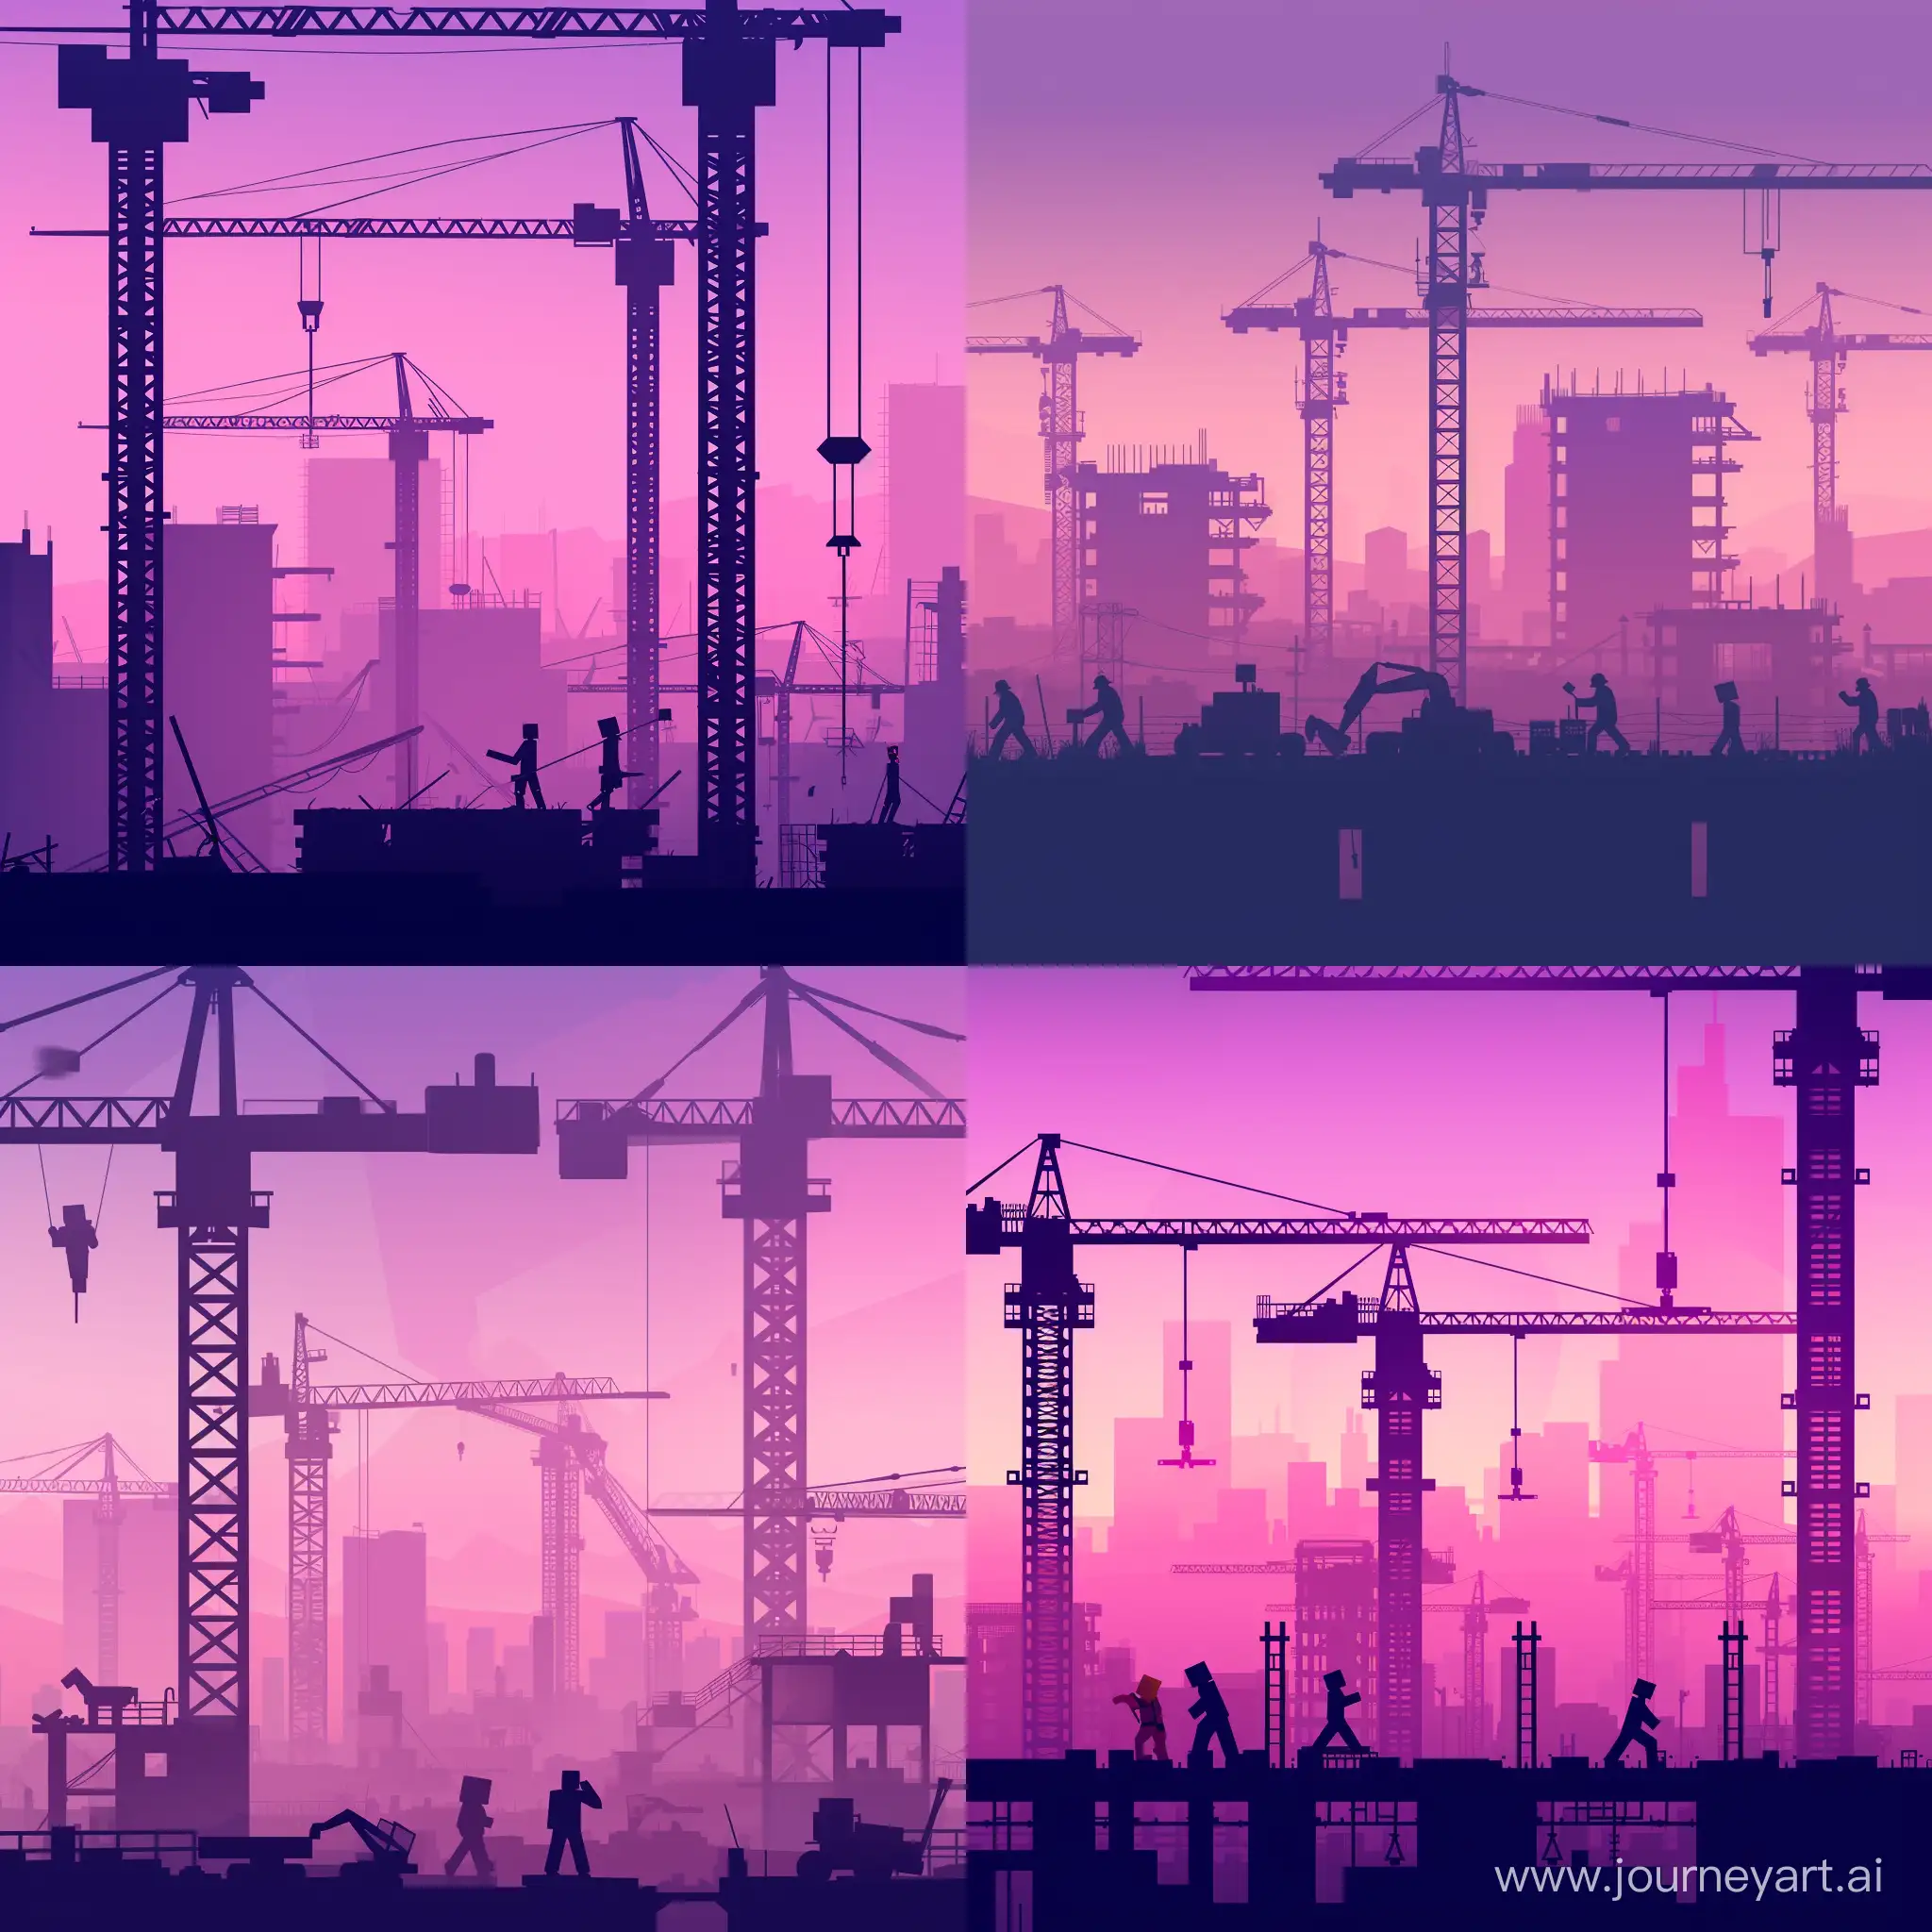 Banner in proportion 4:3, HD art. Theme of minecraft logo. The background is soft purple and pink gradient color,black high-rise cranes in the background, constructivism, vector design, workers, dribbble illustration